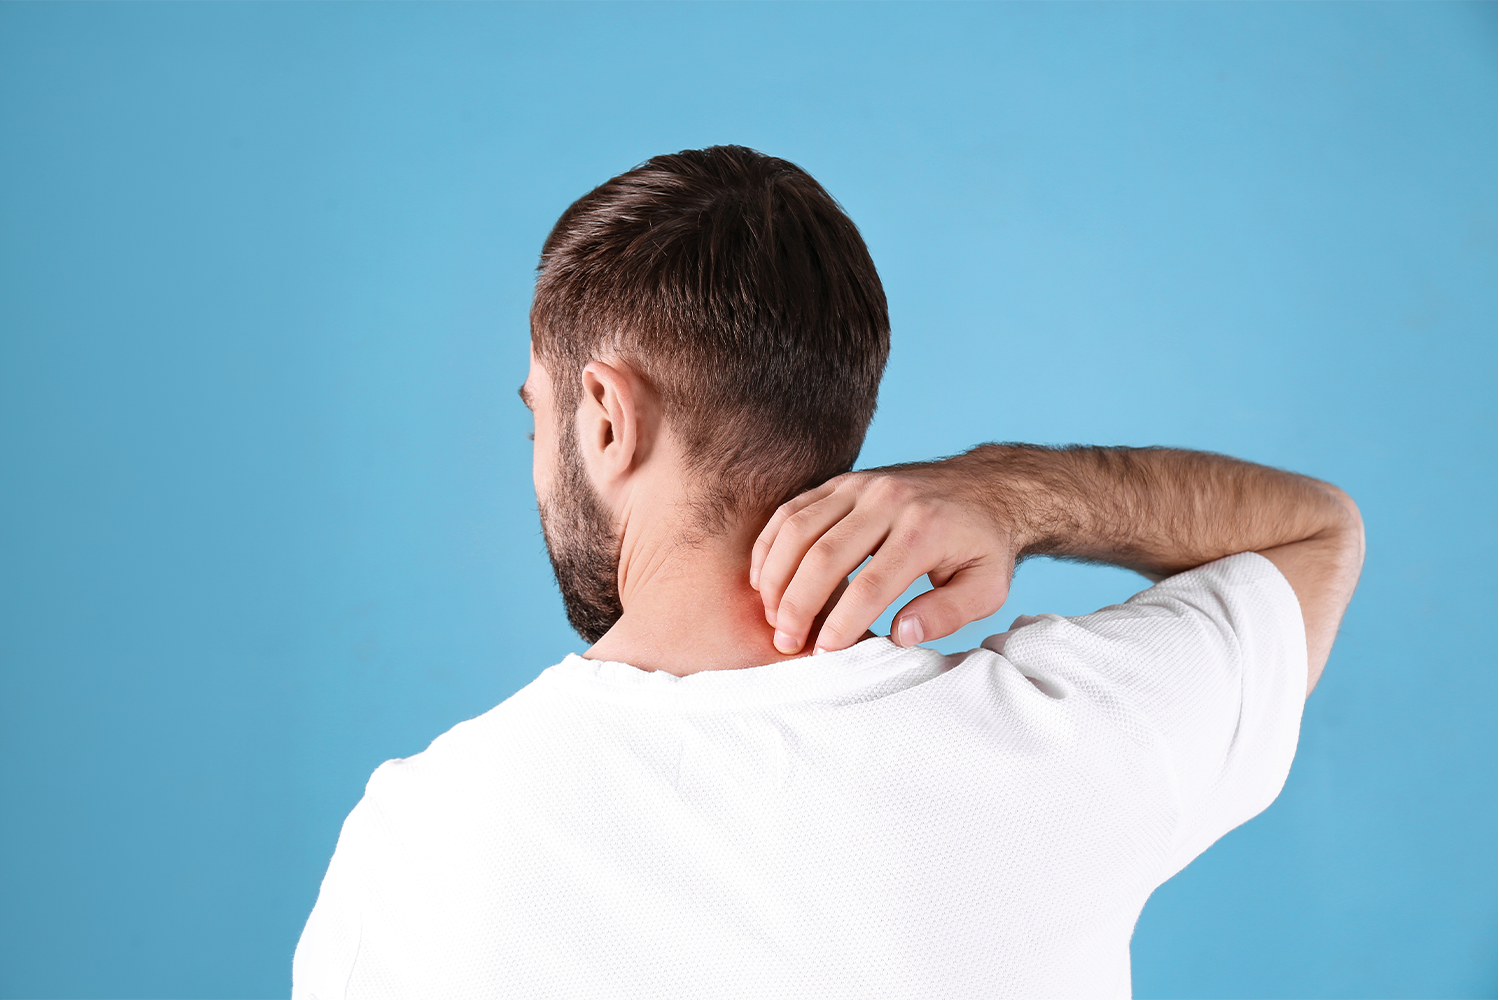 What Causes Back Acne in Males?